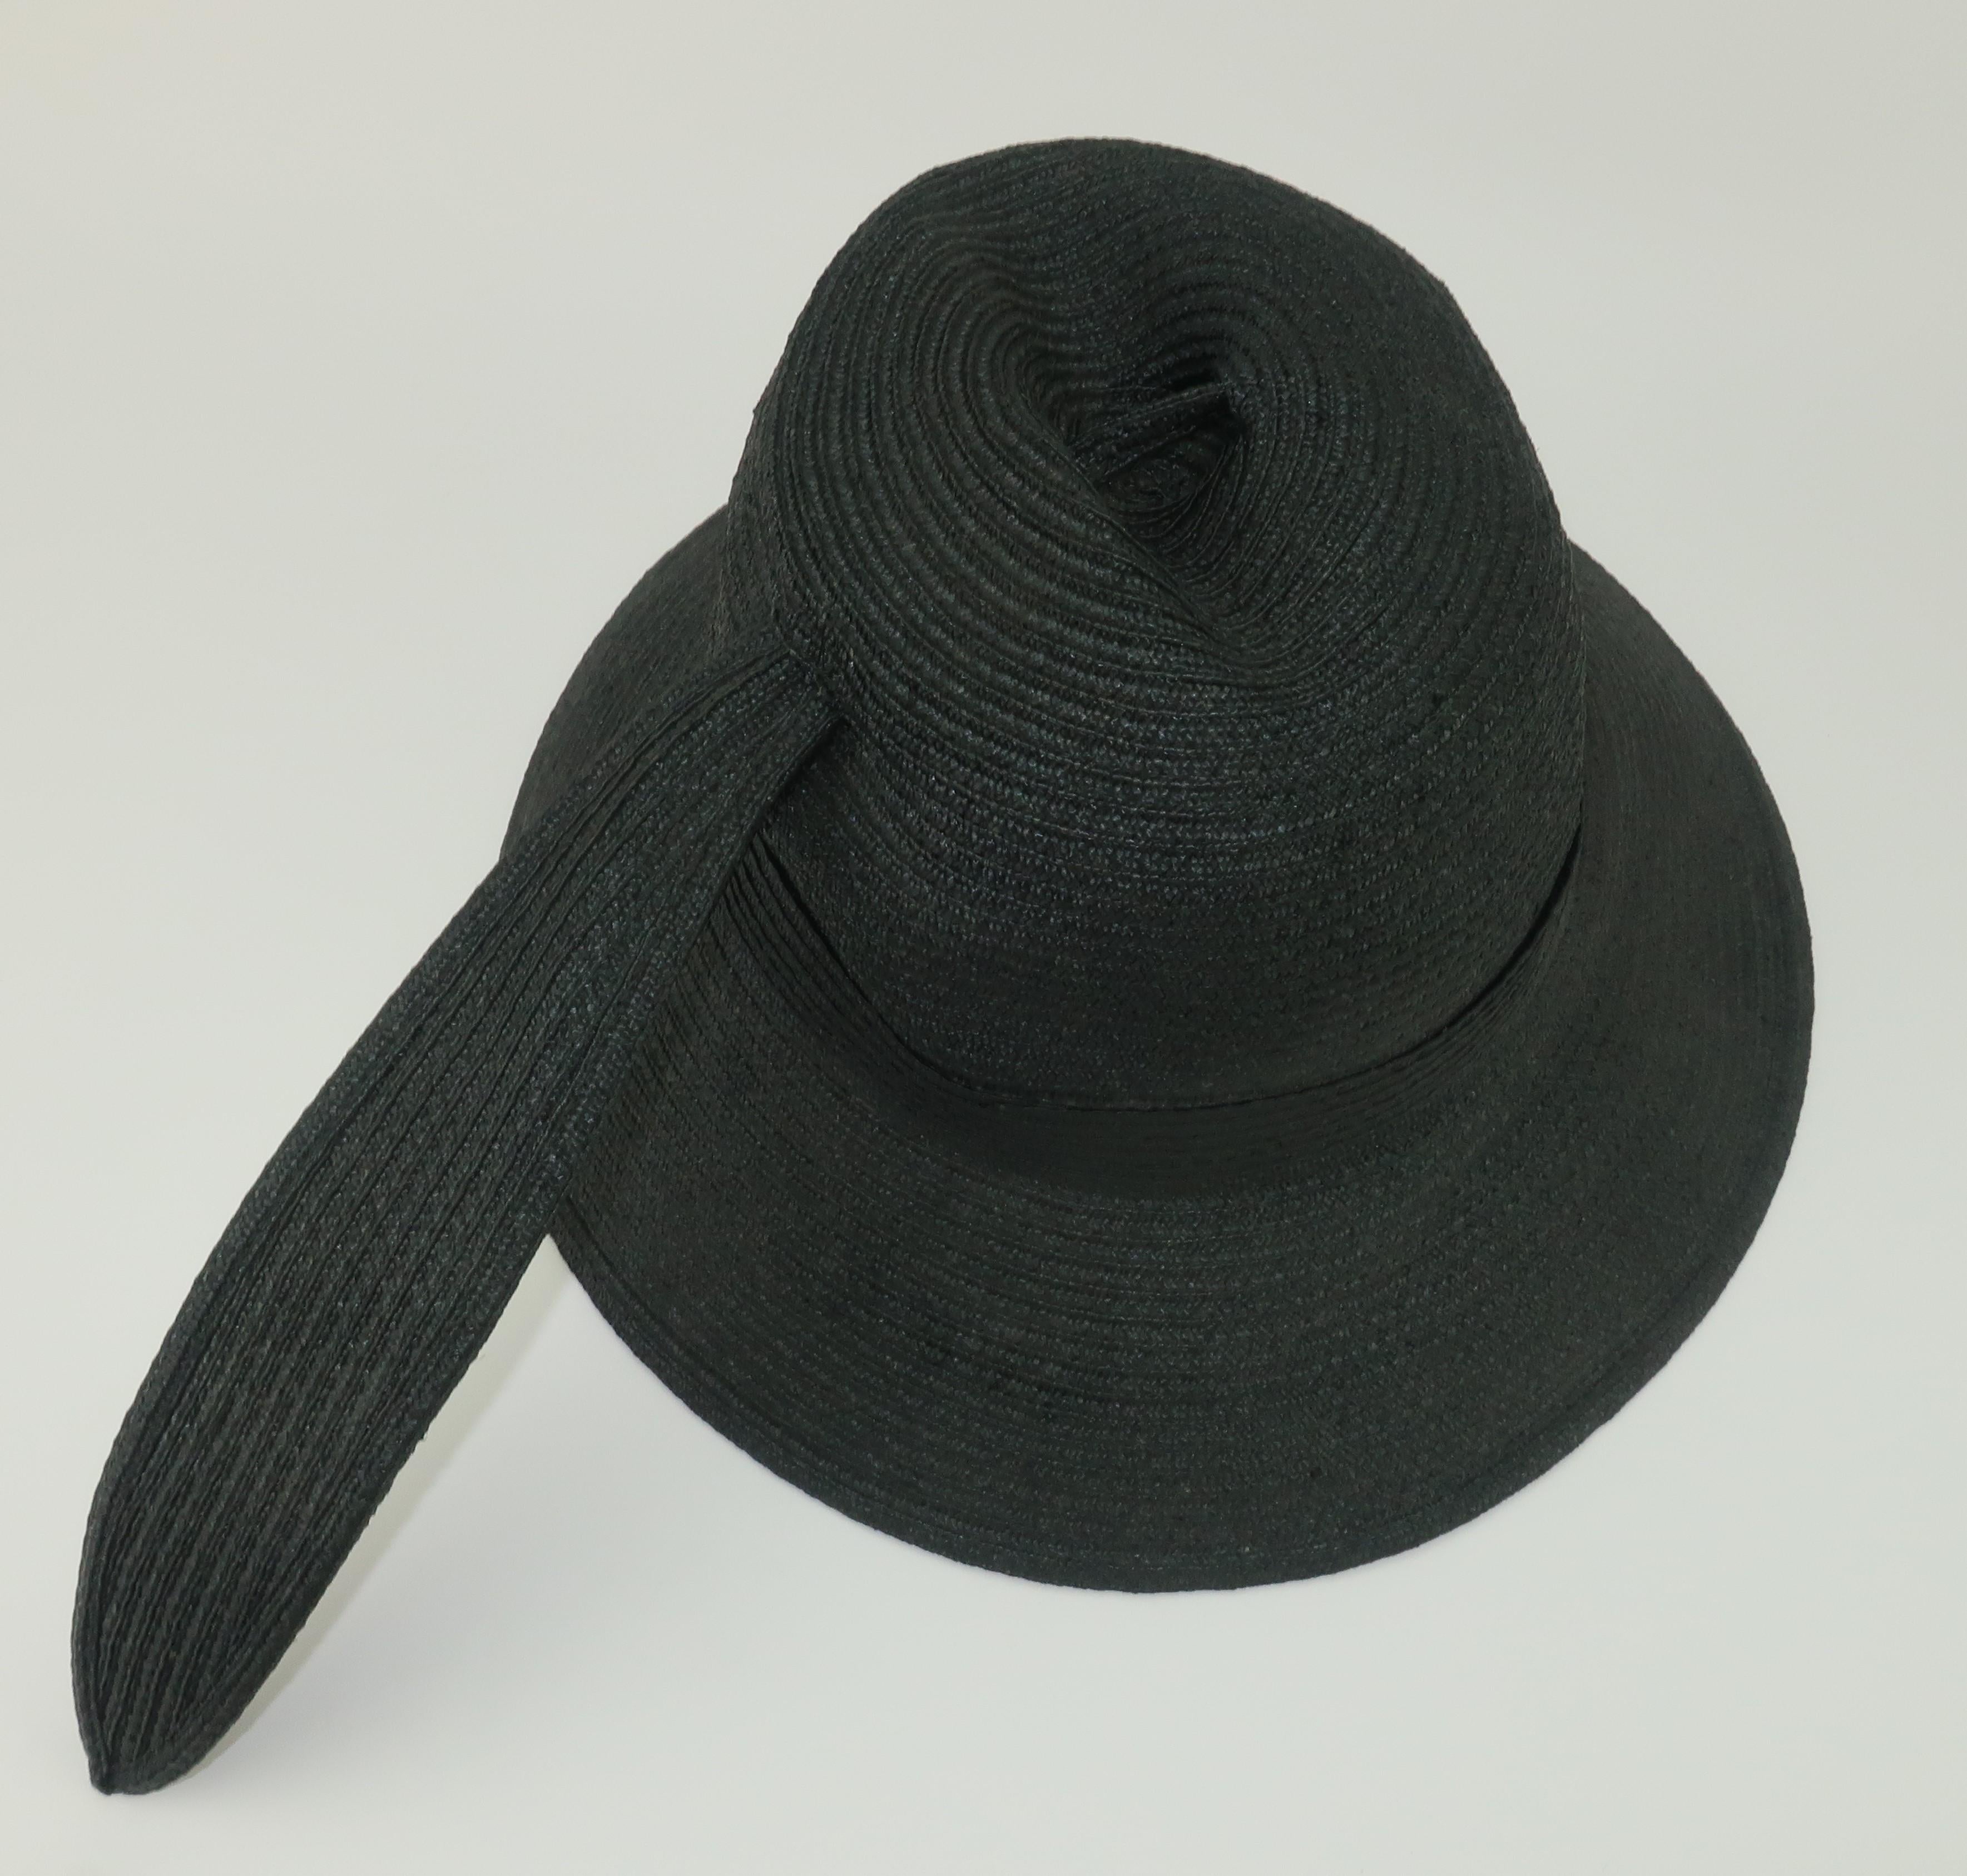 Yves Saint Laurent Black Straw Bucket Hat With Stylized Feather, 1970's 1